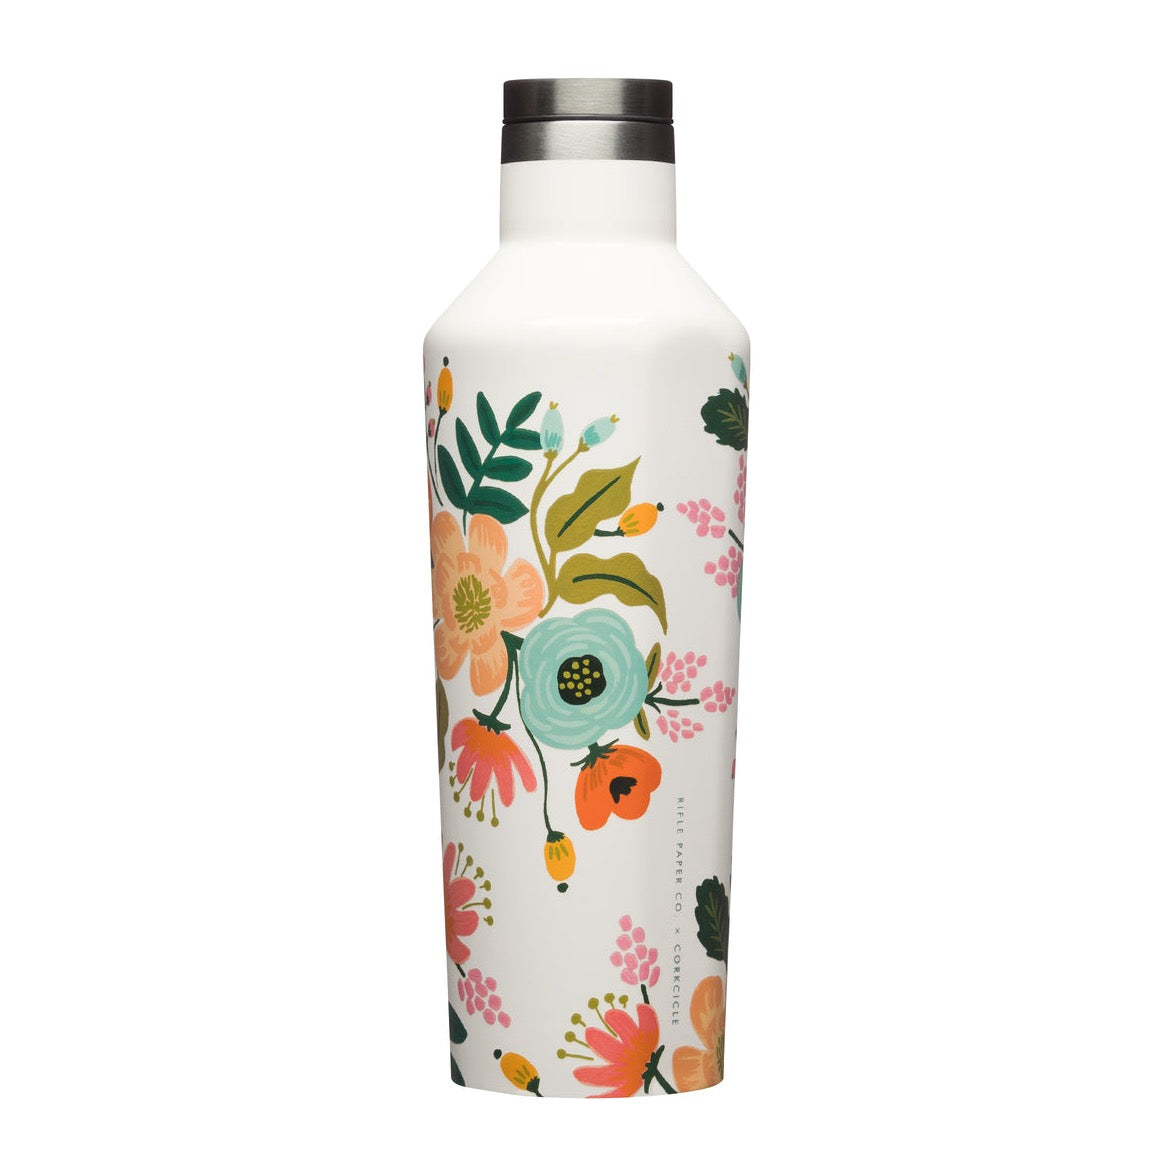 Corkcicle Rifle Paper Co. Canteen 475ml - Cream Lively Floral - Insulated Stainless Steel Bottle